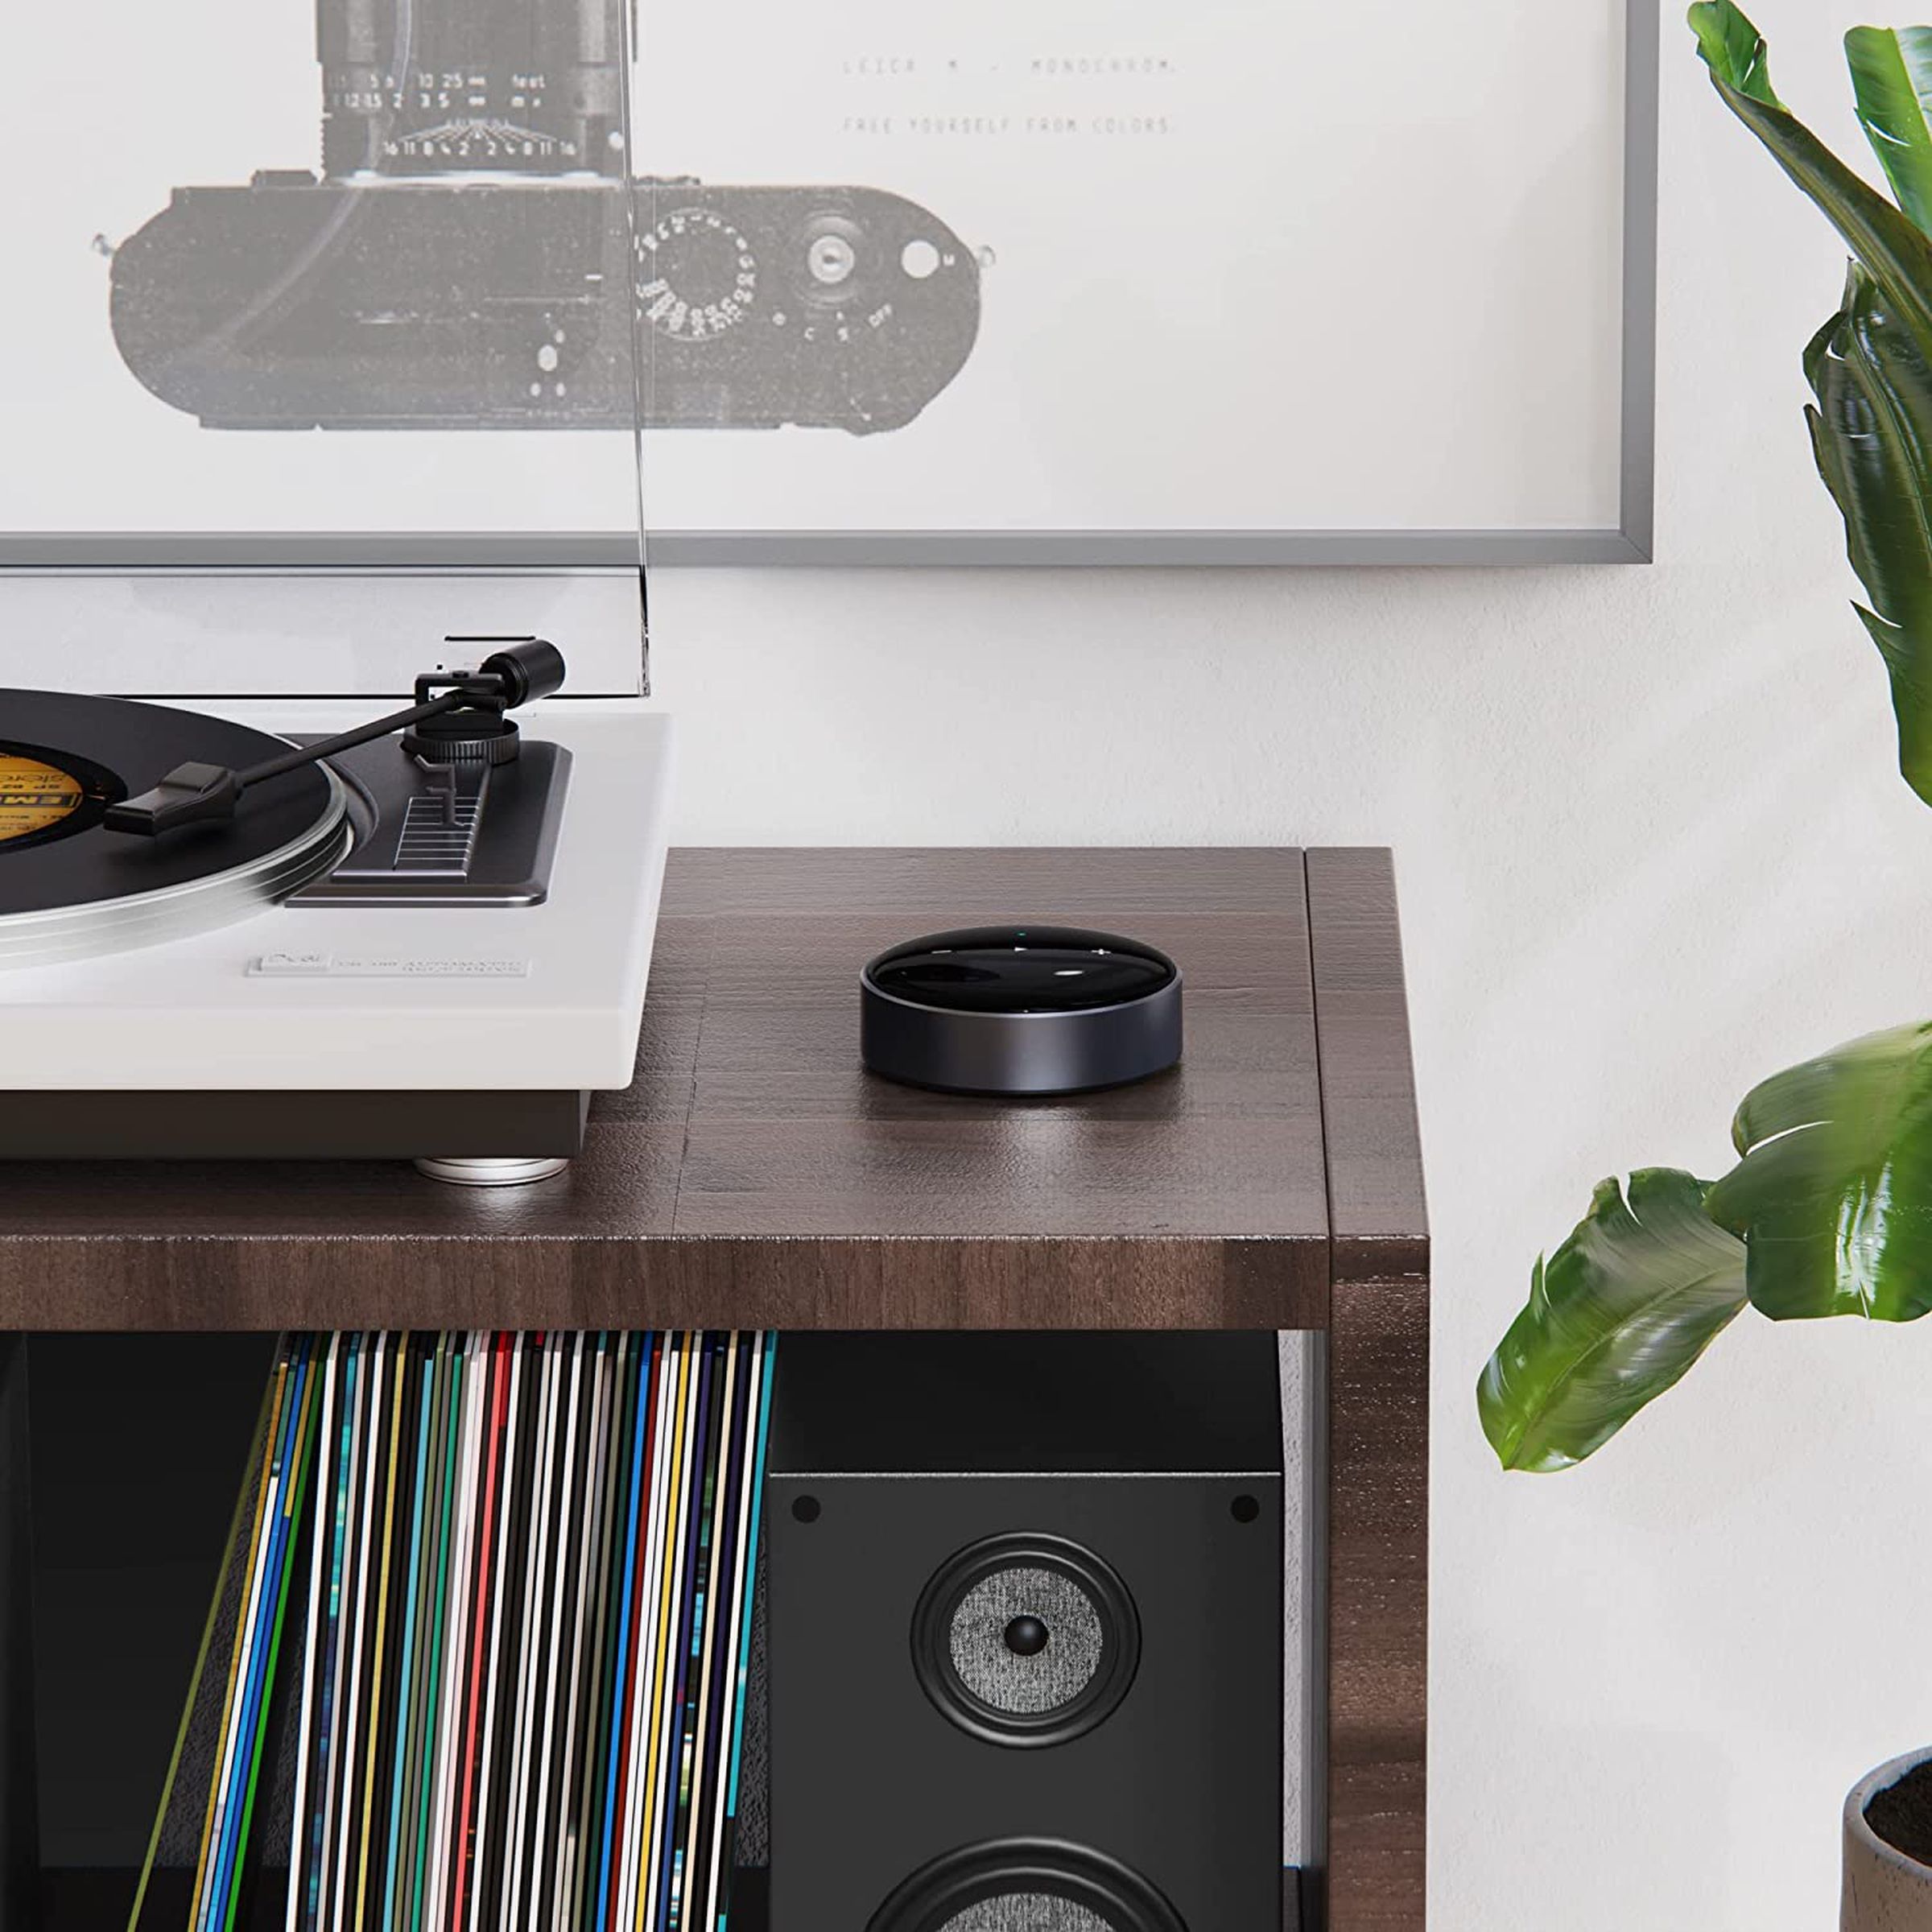 A WiiM Mini sitting on a wood credenza next to a turntable.